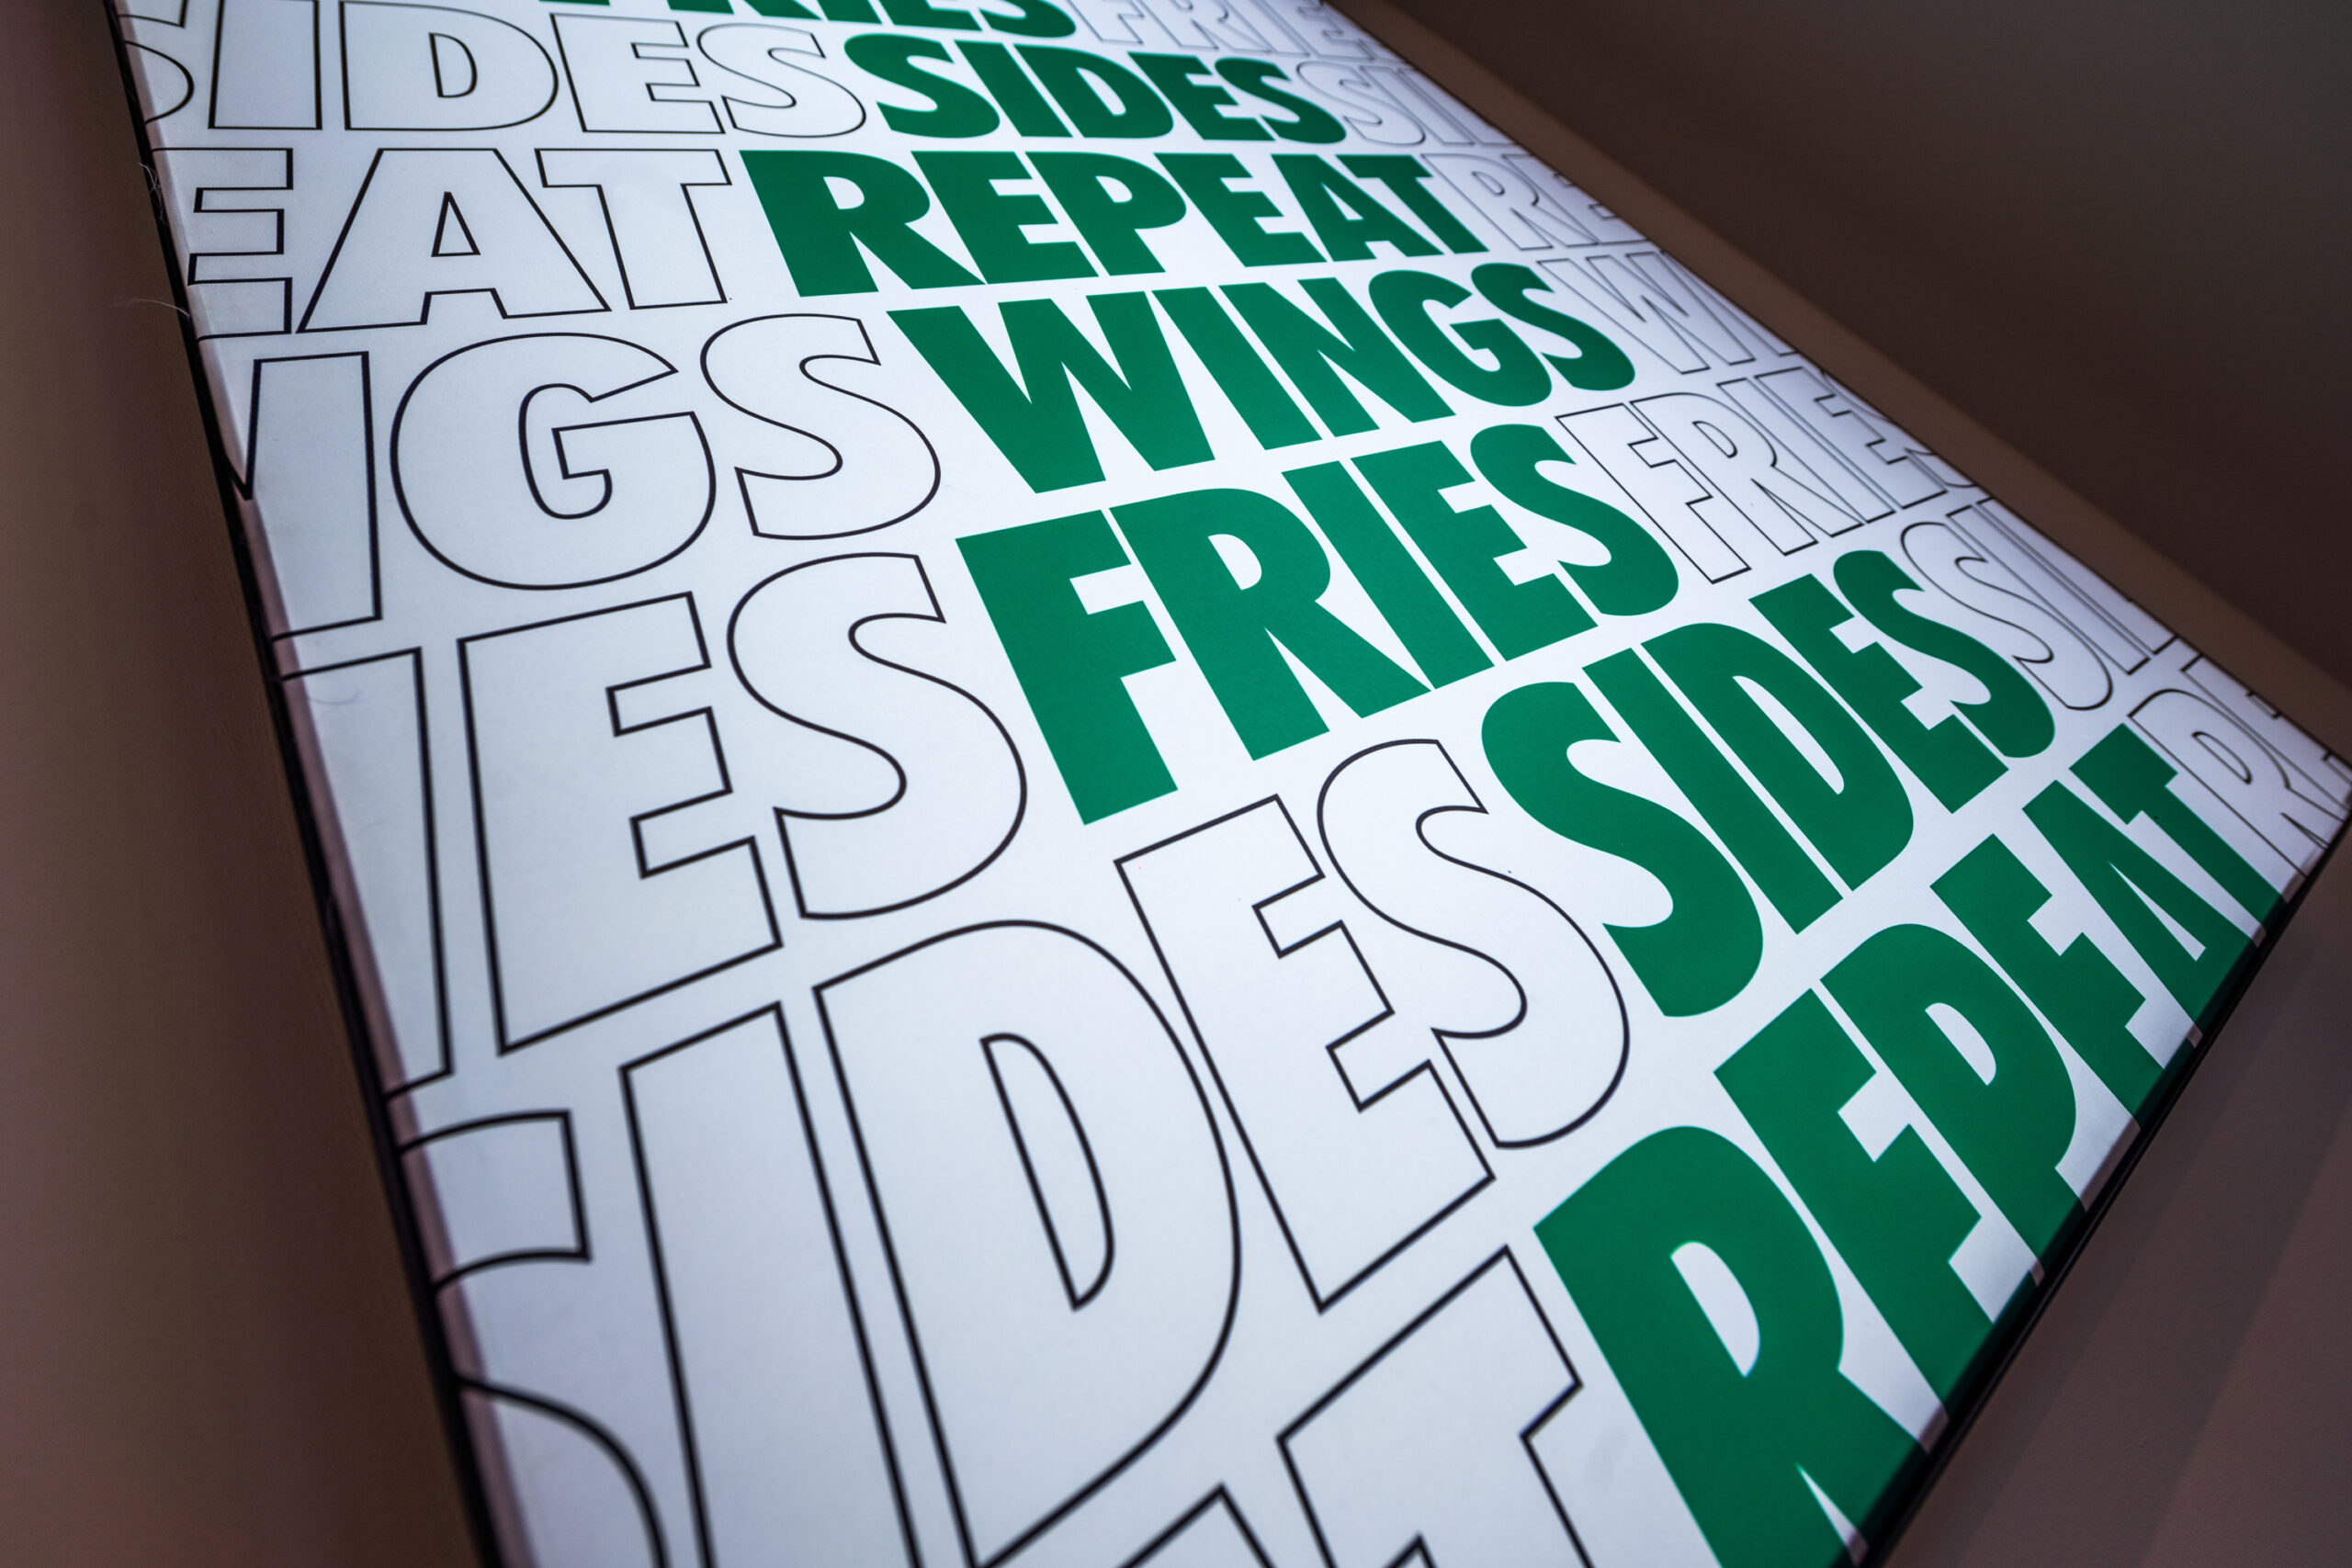 Bar and Restaurant Signage - Wing Stop